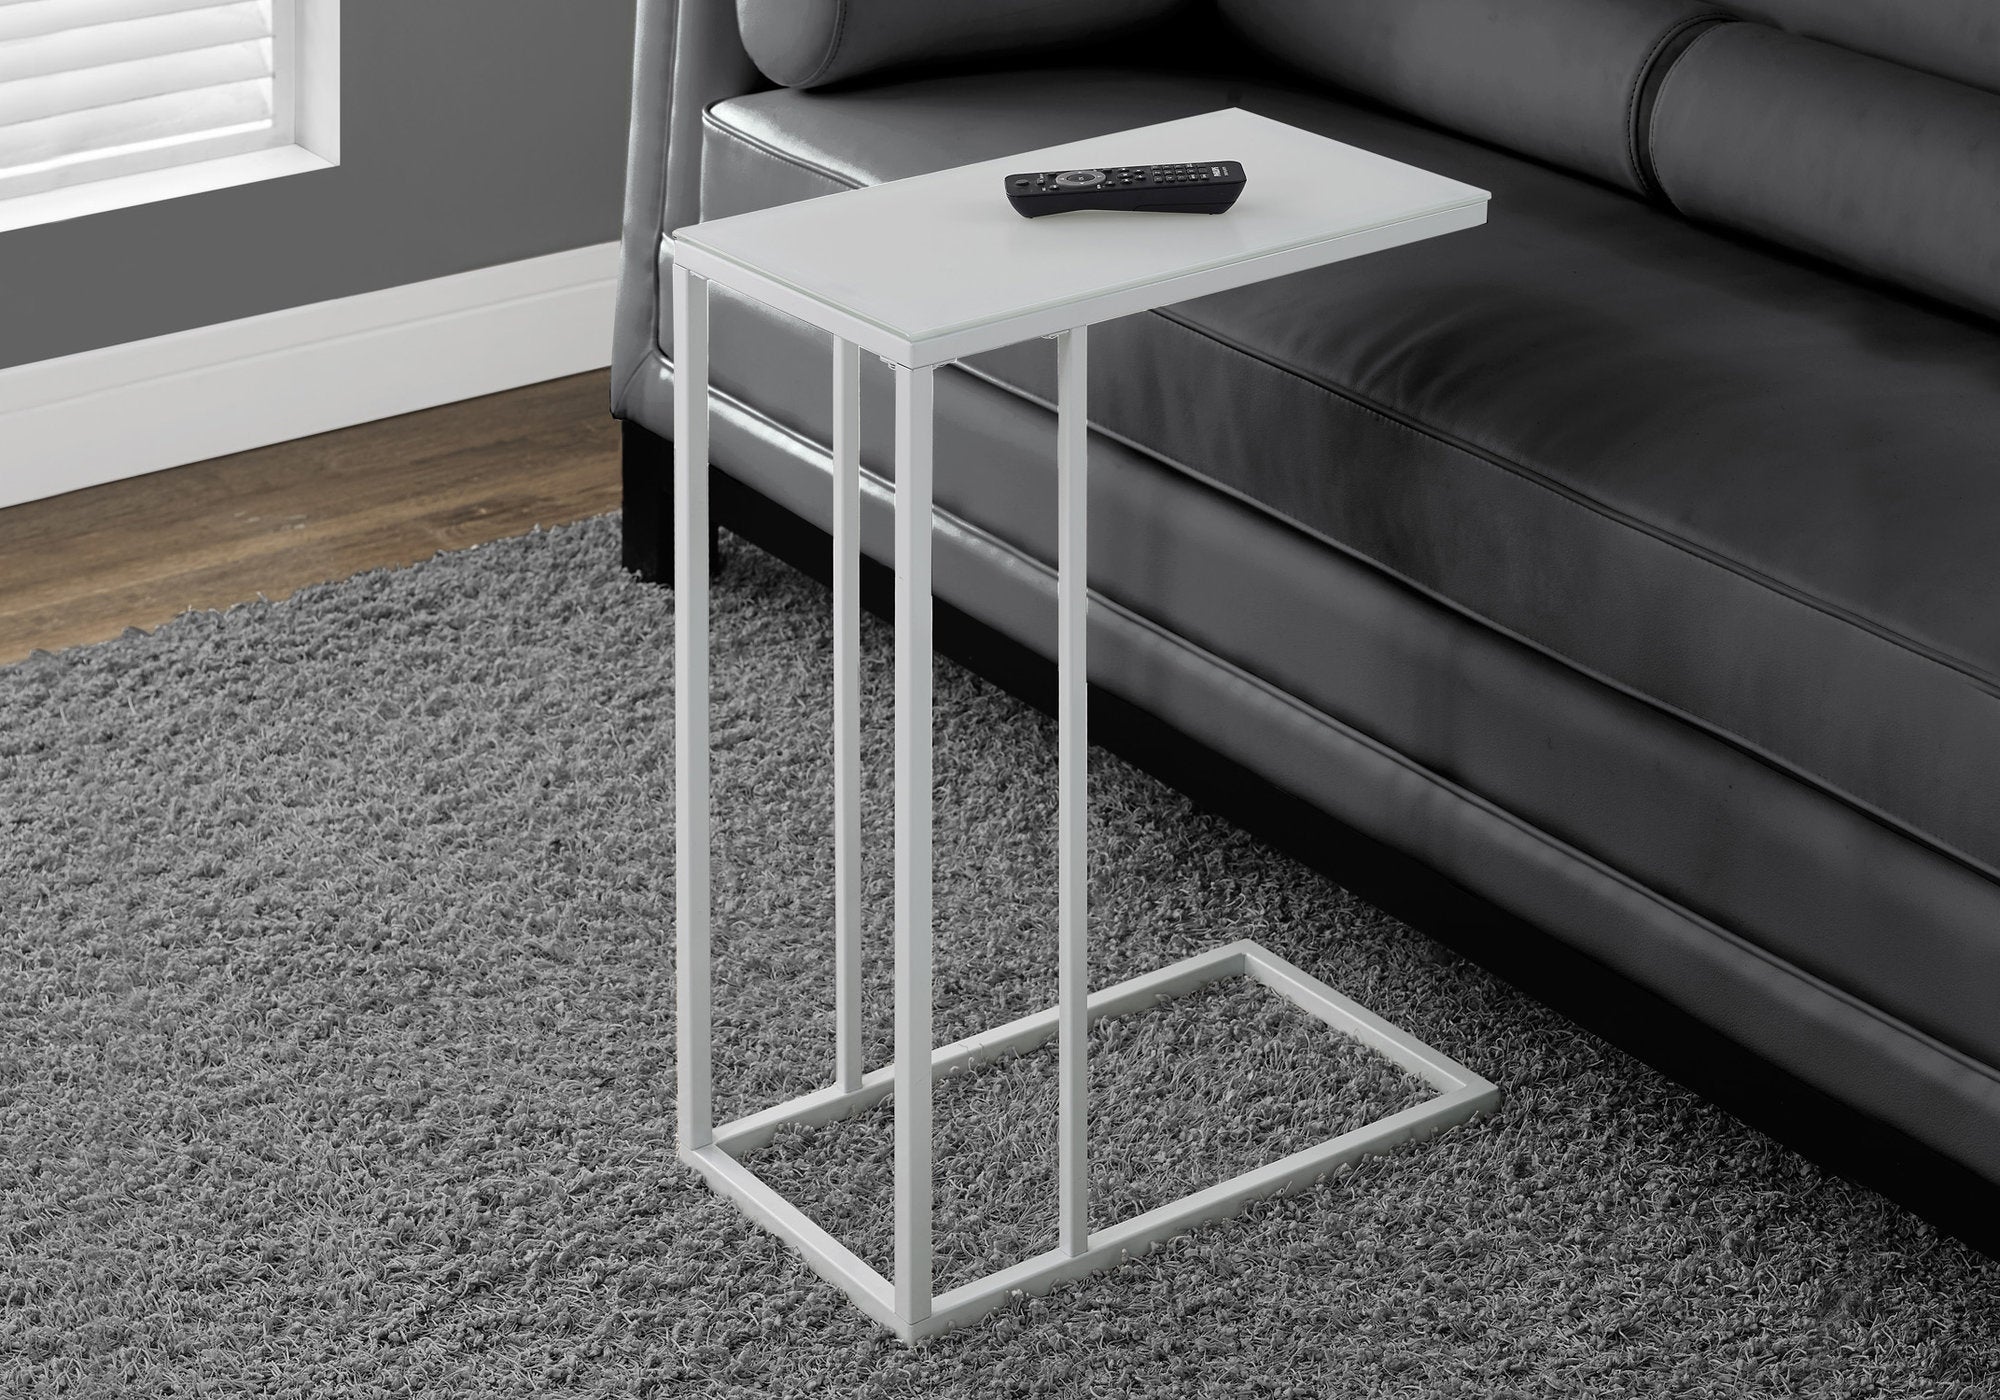 MN-883037    Accent Table, C-Shaped, End, Side, Snack, Living Room, Bedroom, Metal Legs, Tempered Glass, White, White, Contemporary, Modern